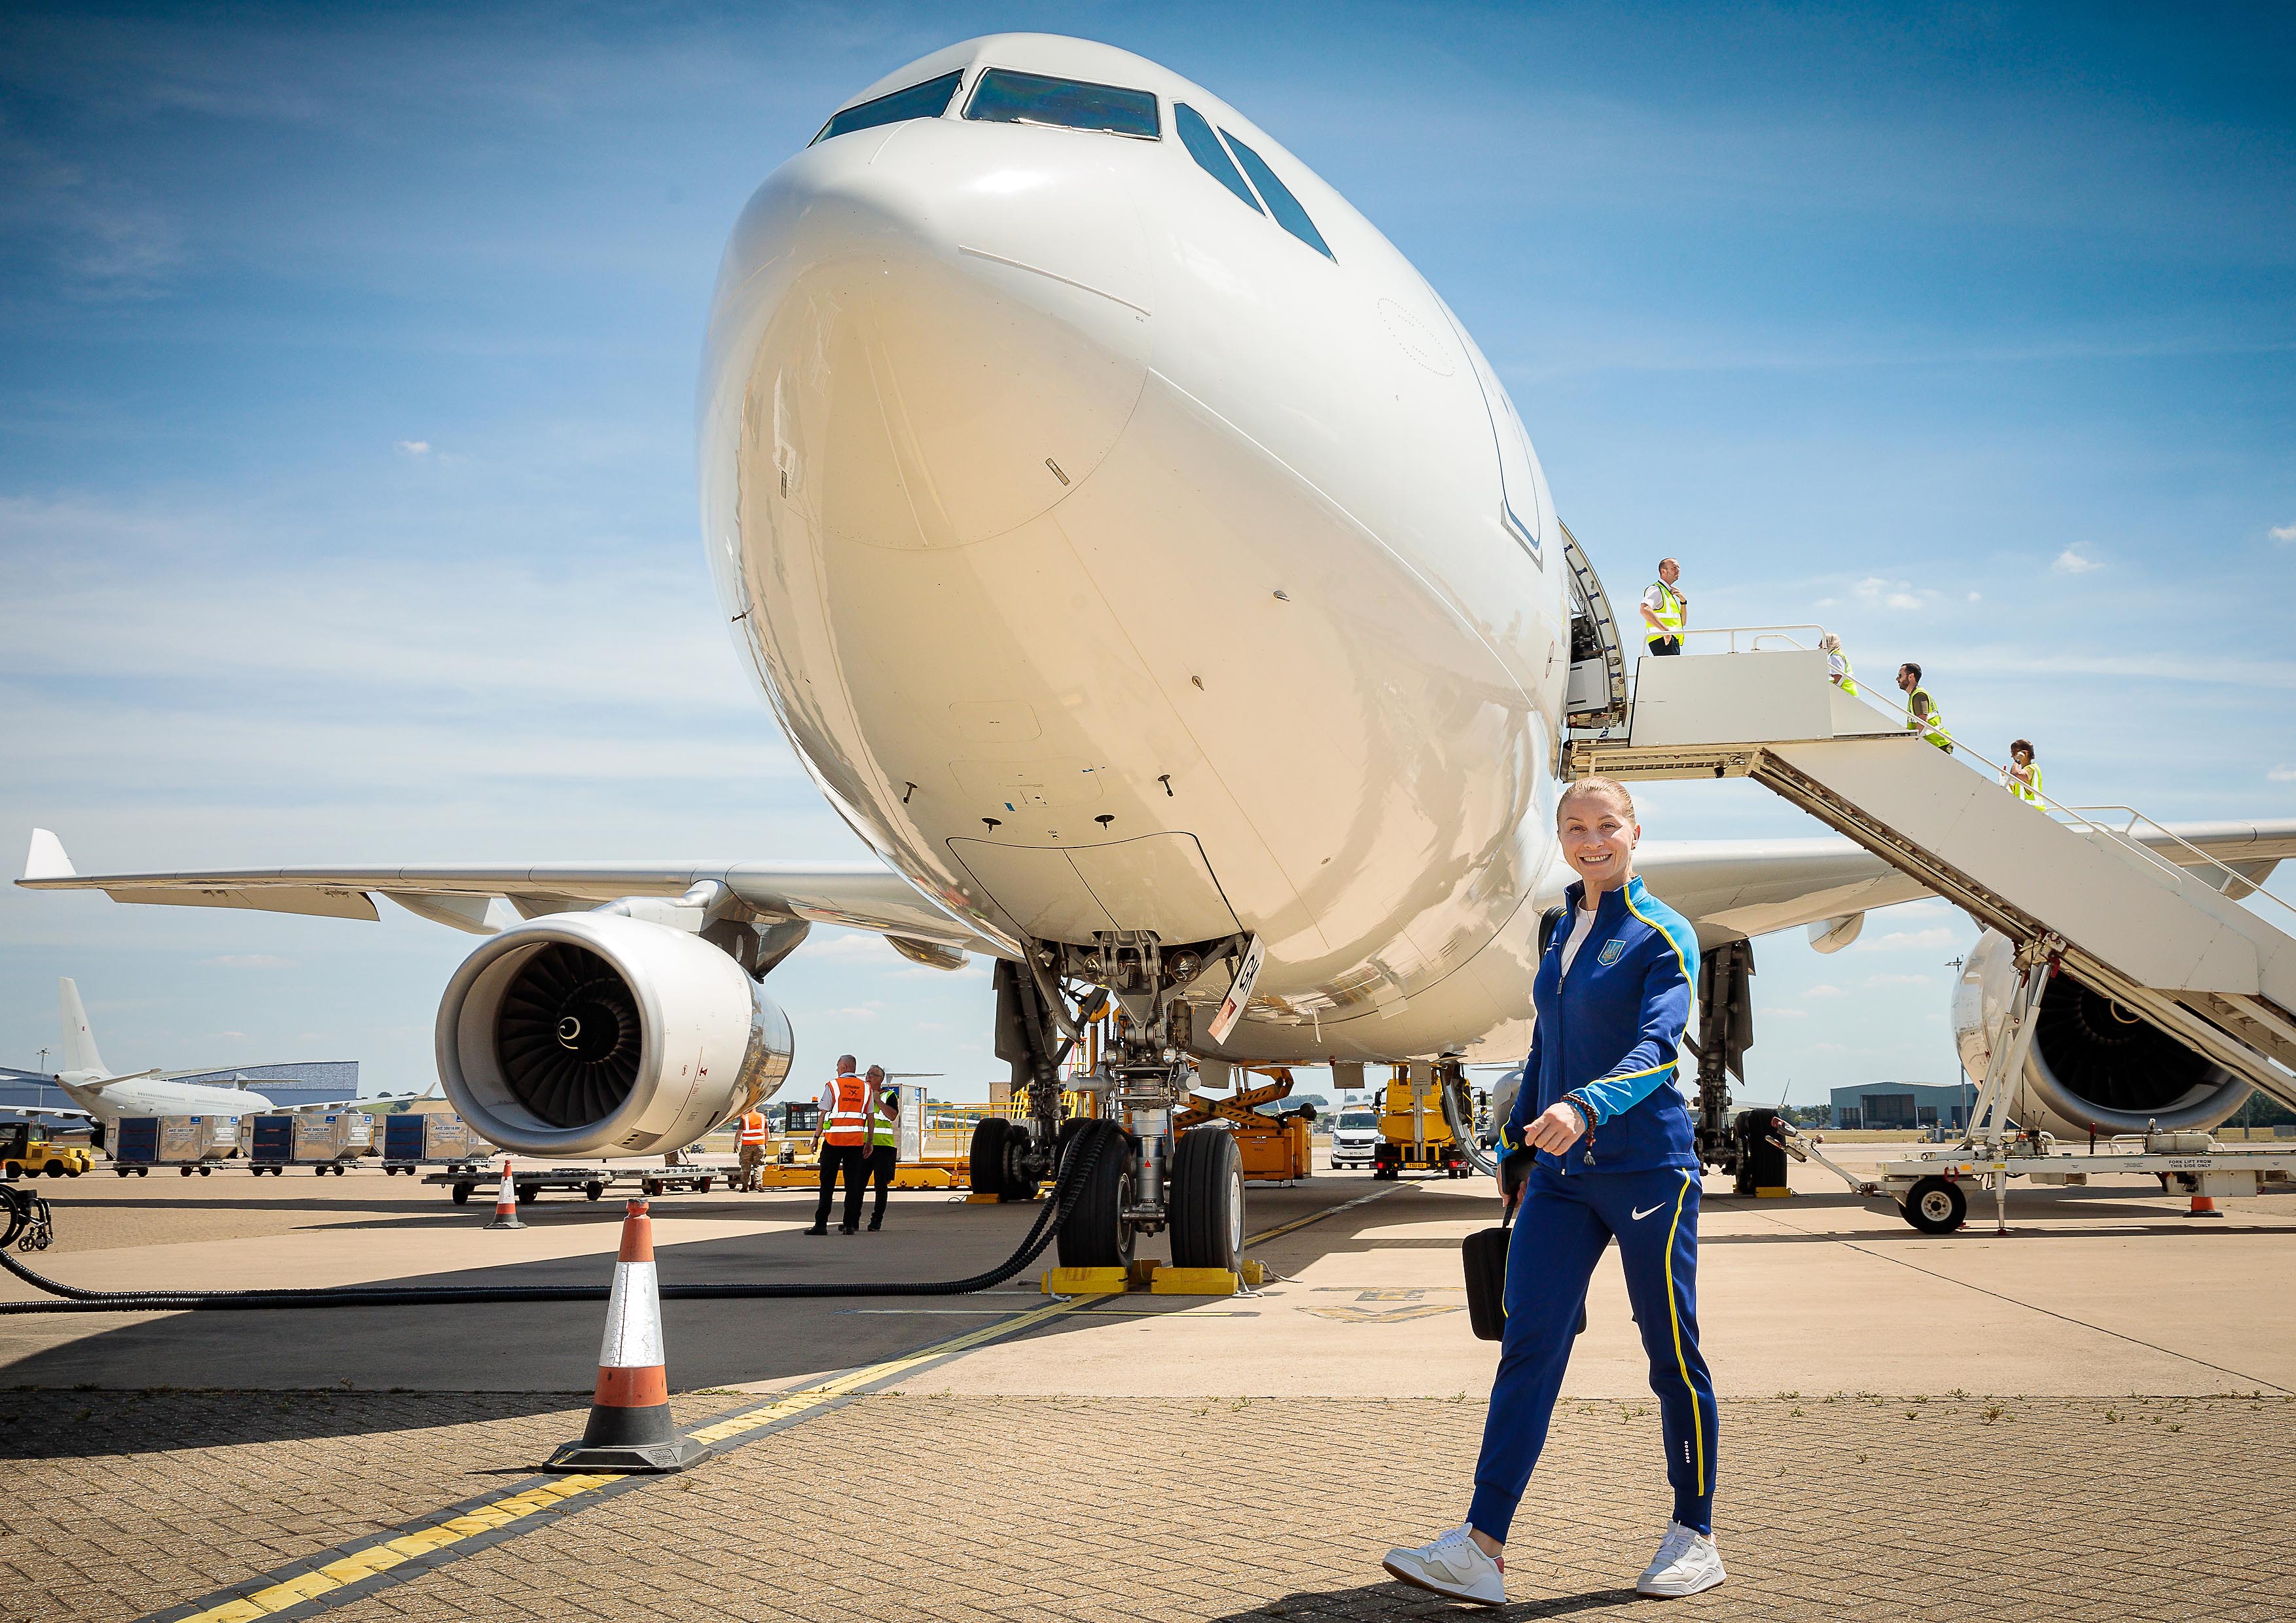 Image shows Games athlete walking past a RAF Voyager on the airfield.